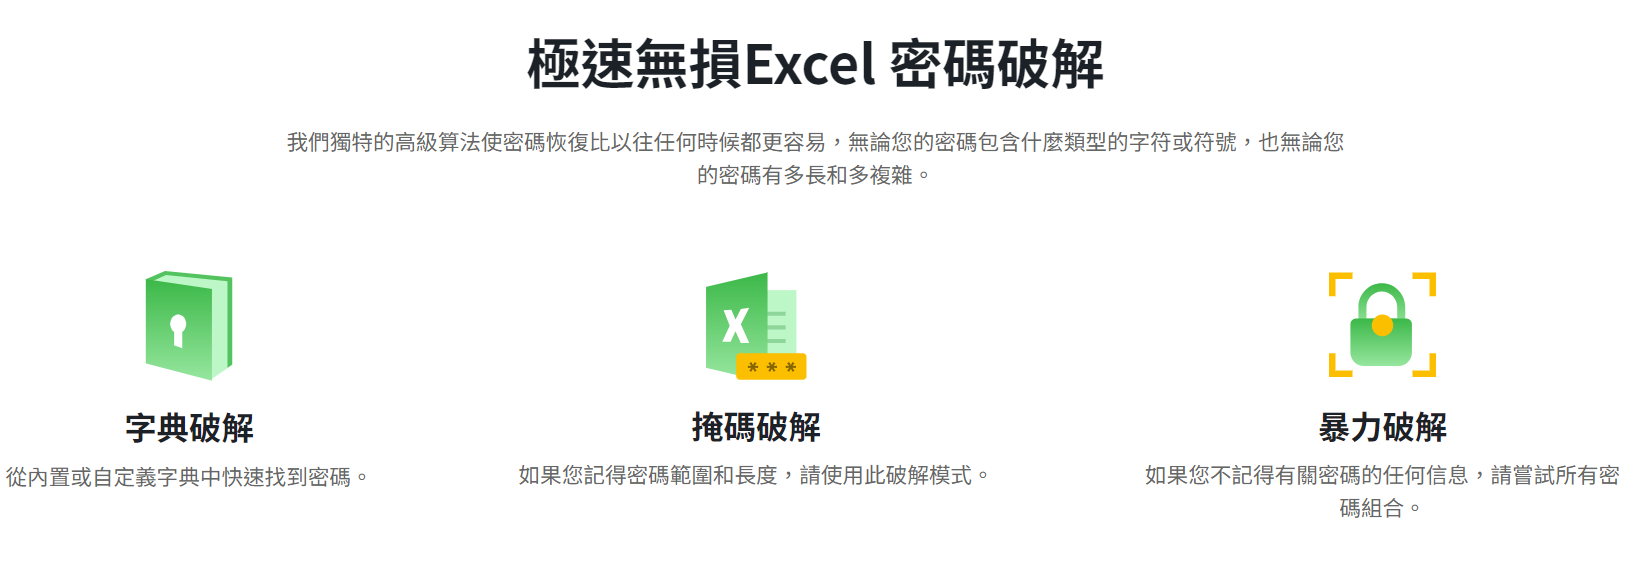 EXCEL密码破解软件 PassFab for Excel 8.5.2.7下载